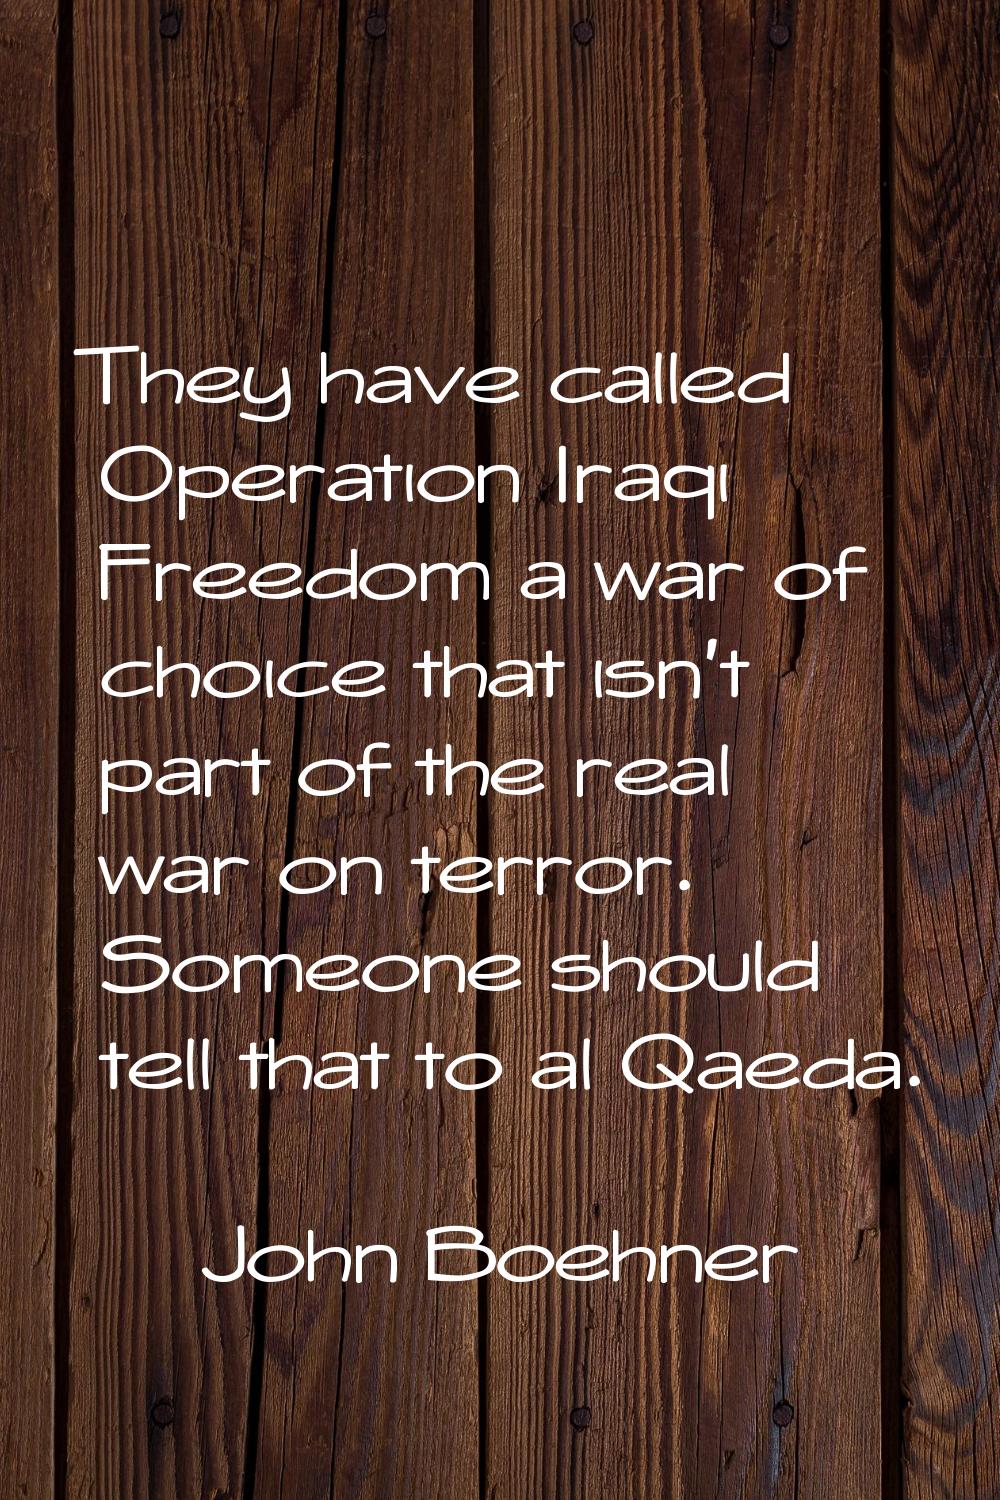 They have called Operation Iraqi Freedom a war of choice that isn't part of the real war on terror.